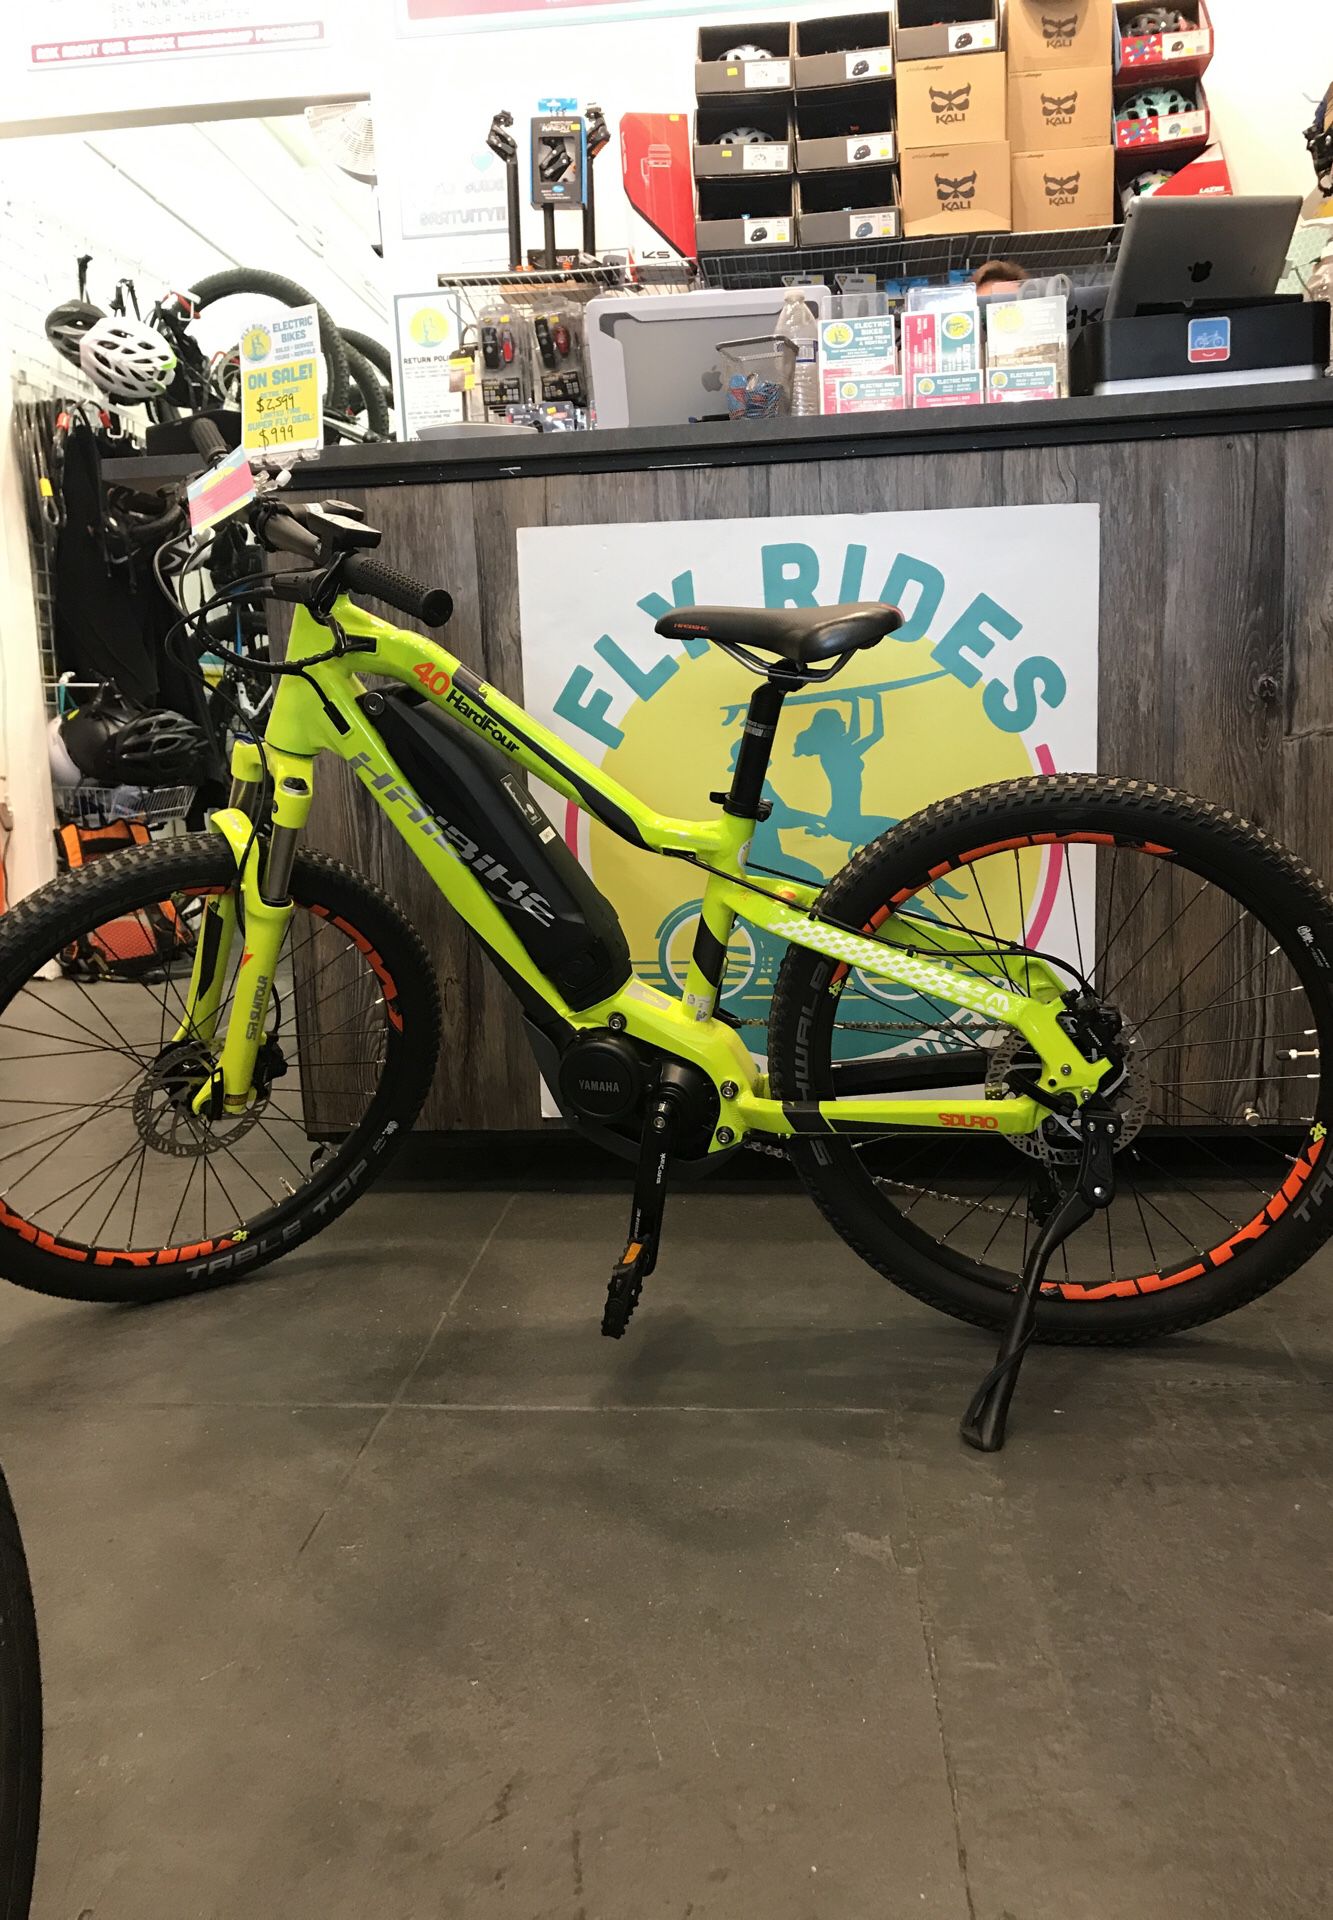 New 2017 Haibike SDURO 4.0 e-Mountain for Sale in Los Angeles, CA - OfferUp